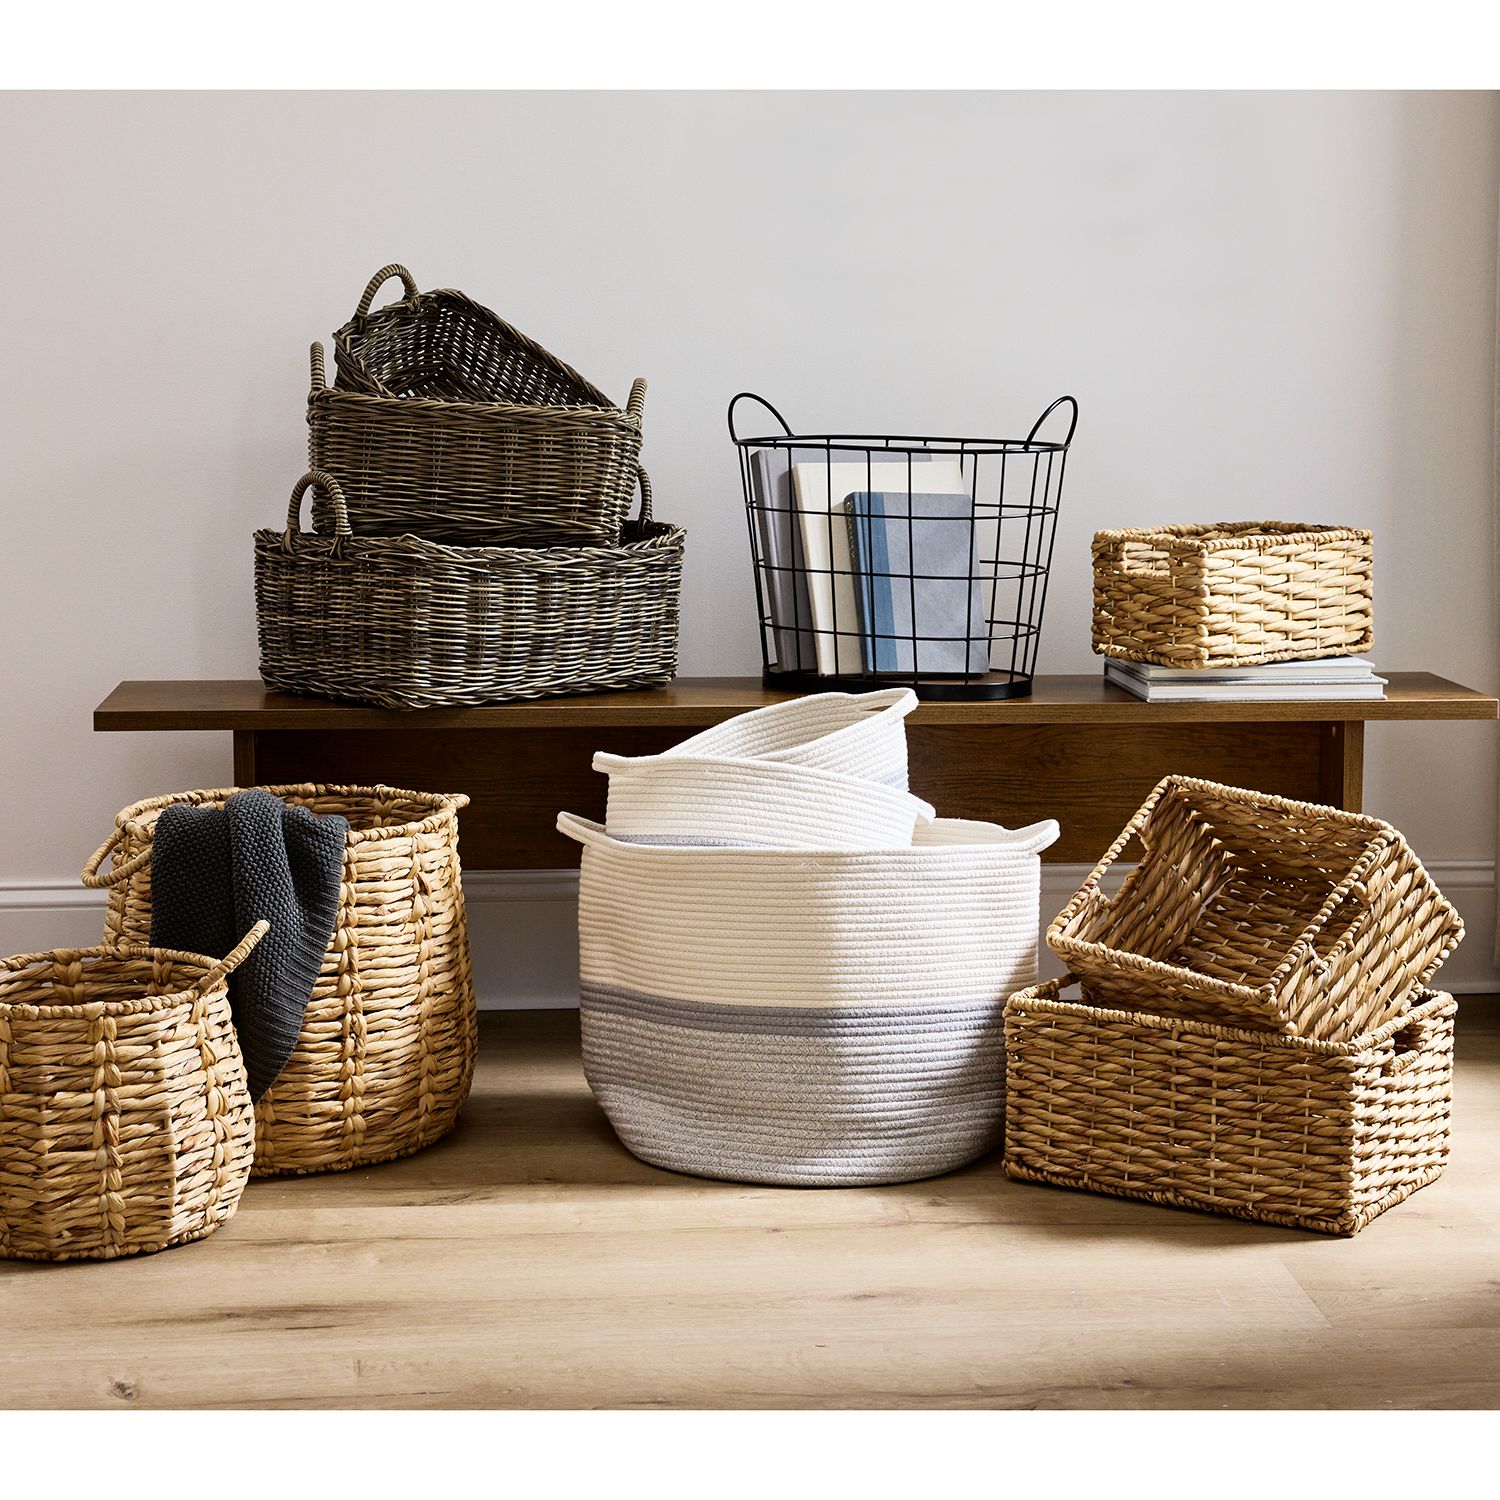 Woven baskets hold room essentials like blankets and throw pillows, keeping your space clutter-free.